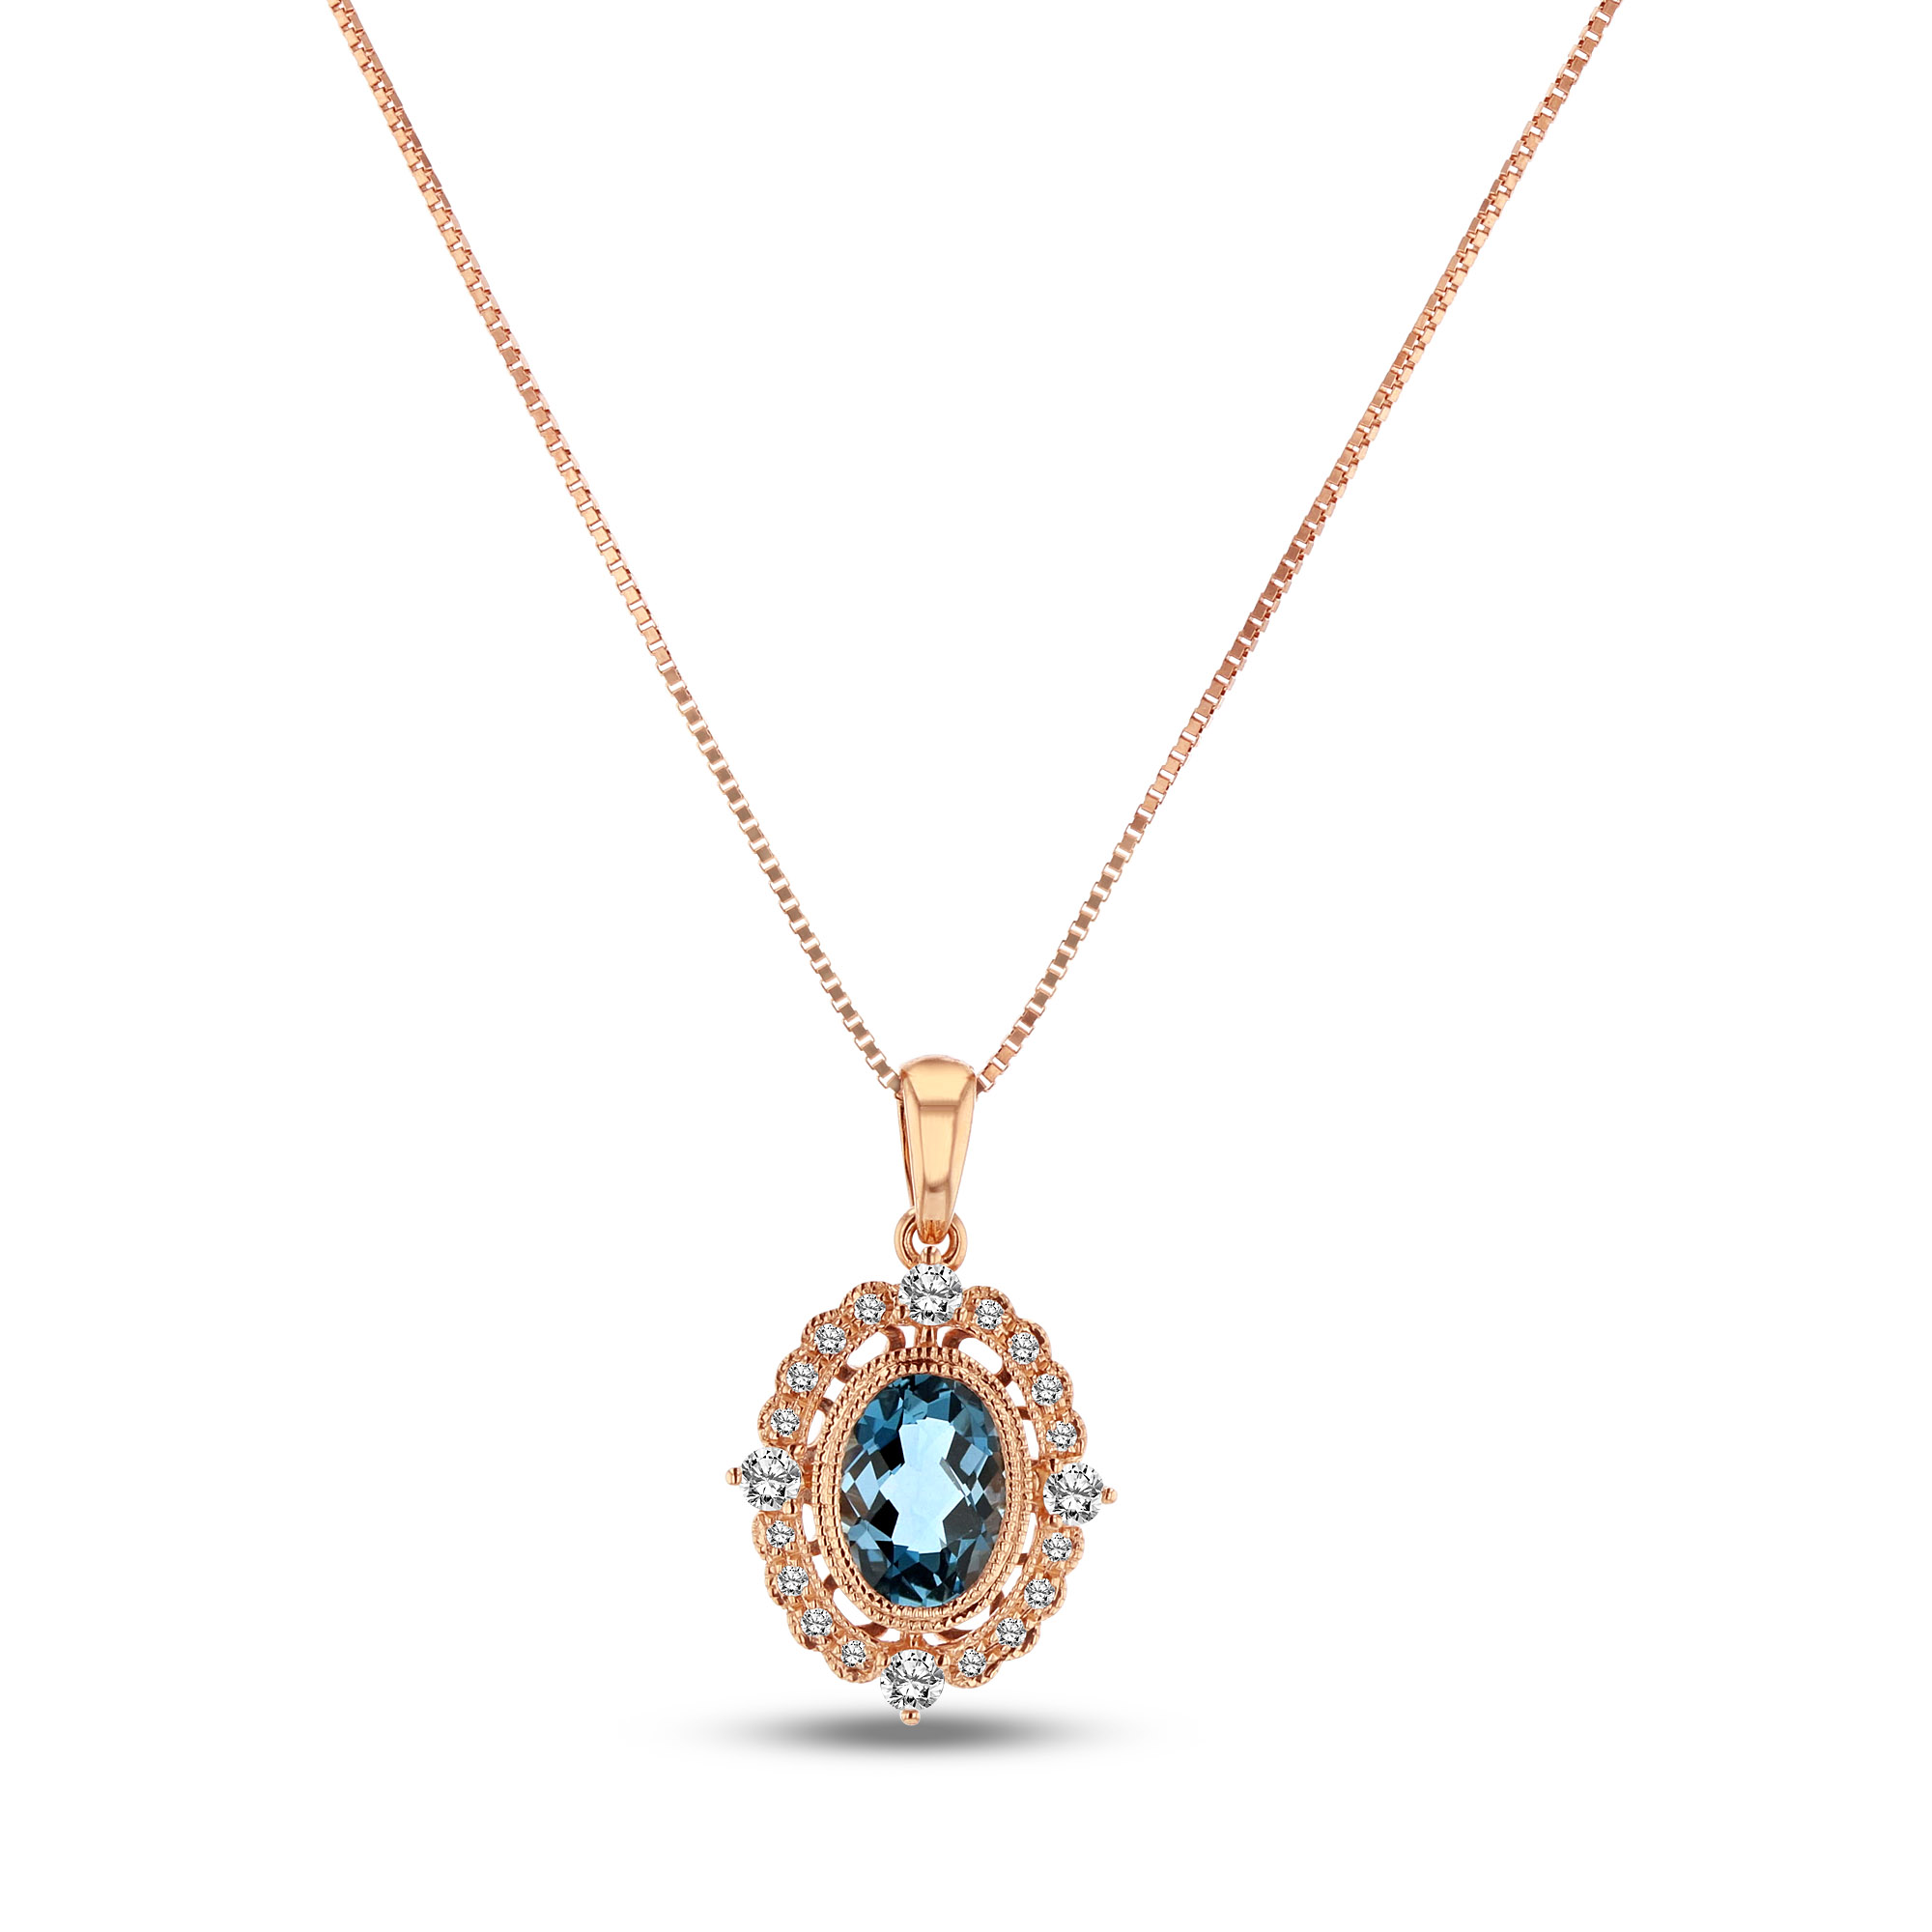 View 0.15ctw Diamond and London Blue Topaz Pendant in 14k Rose Gold